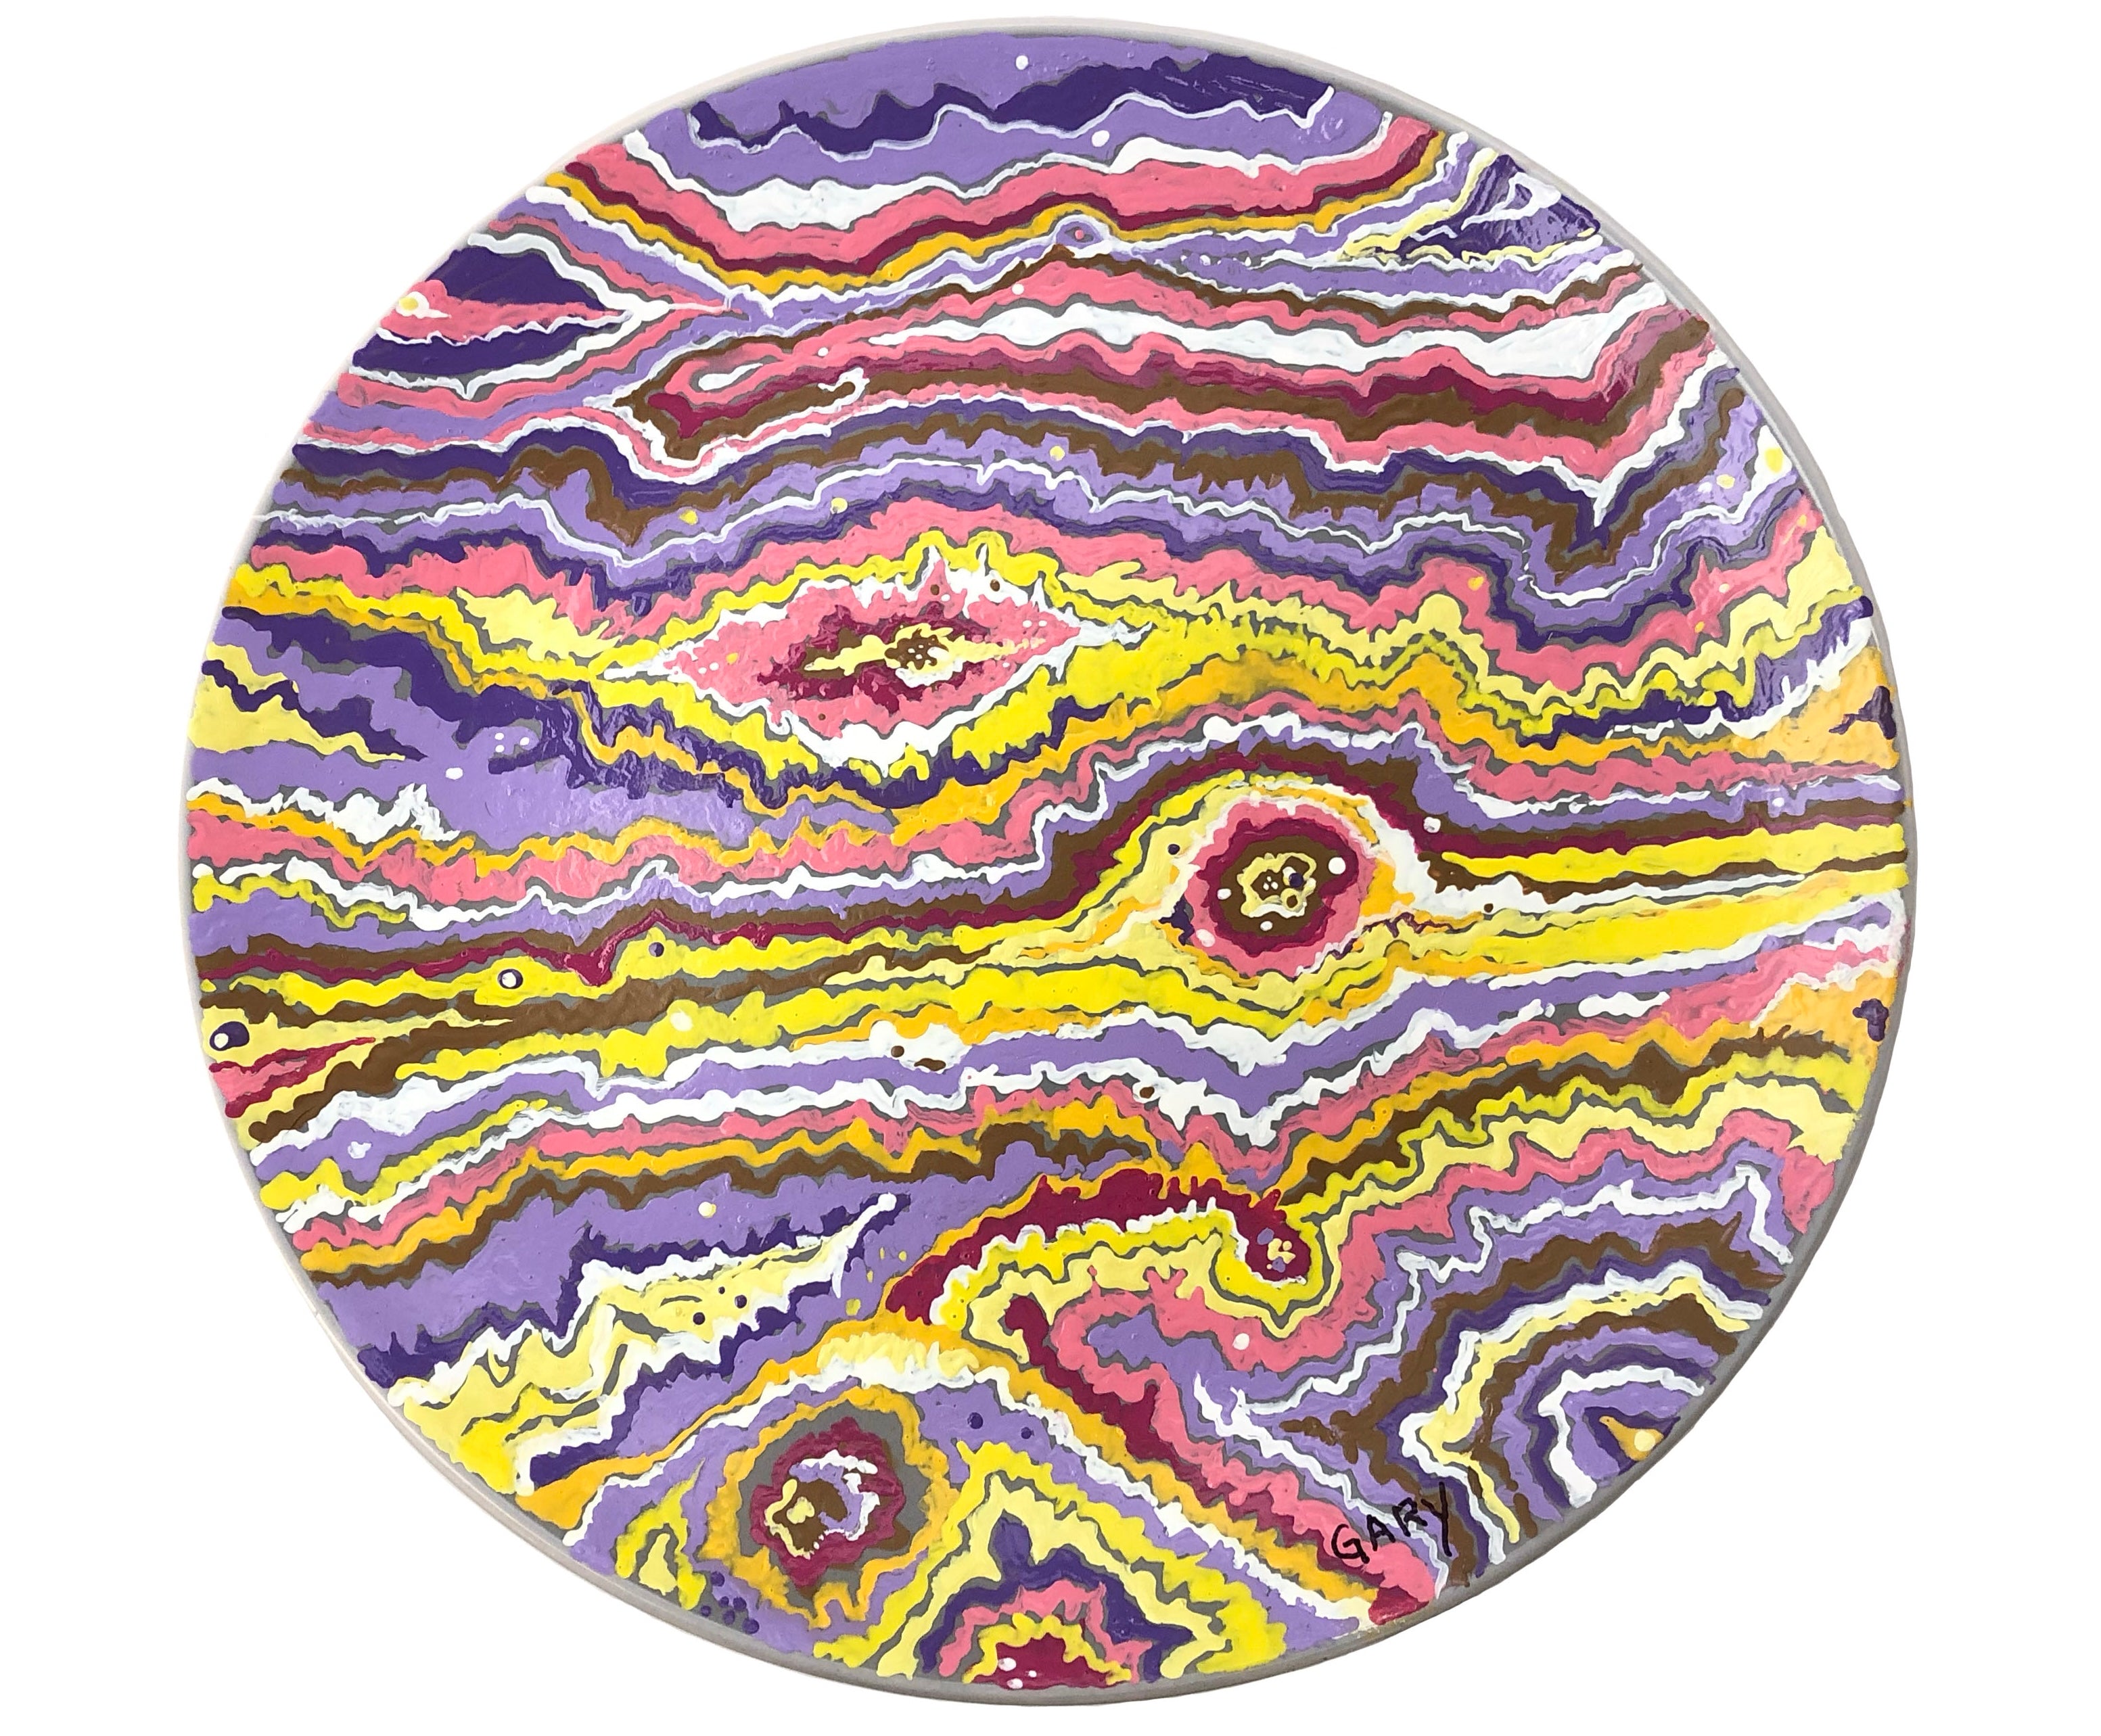 Painted Circle Plate FUN & COLORFUL